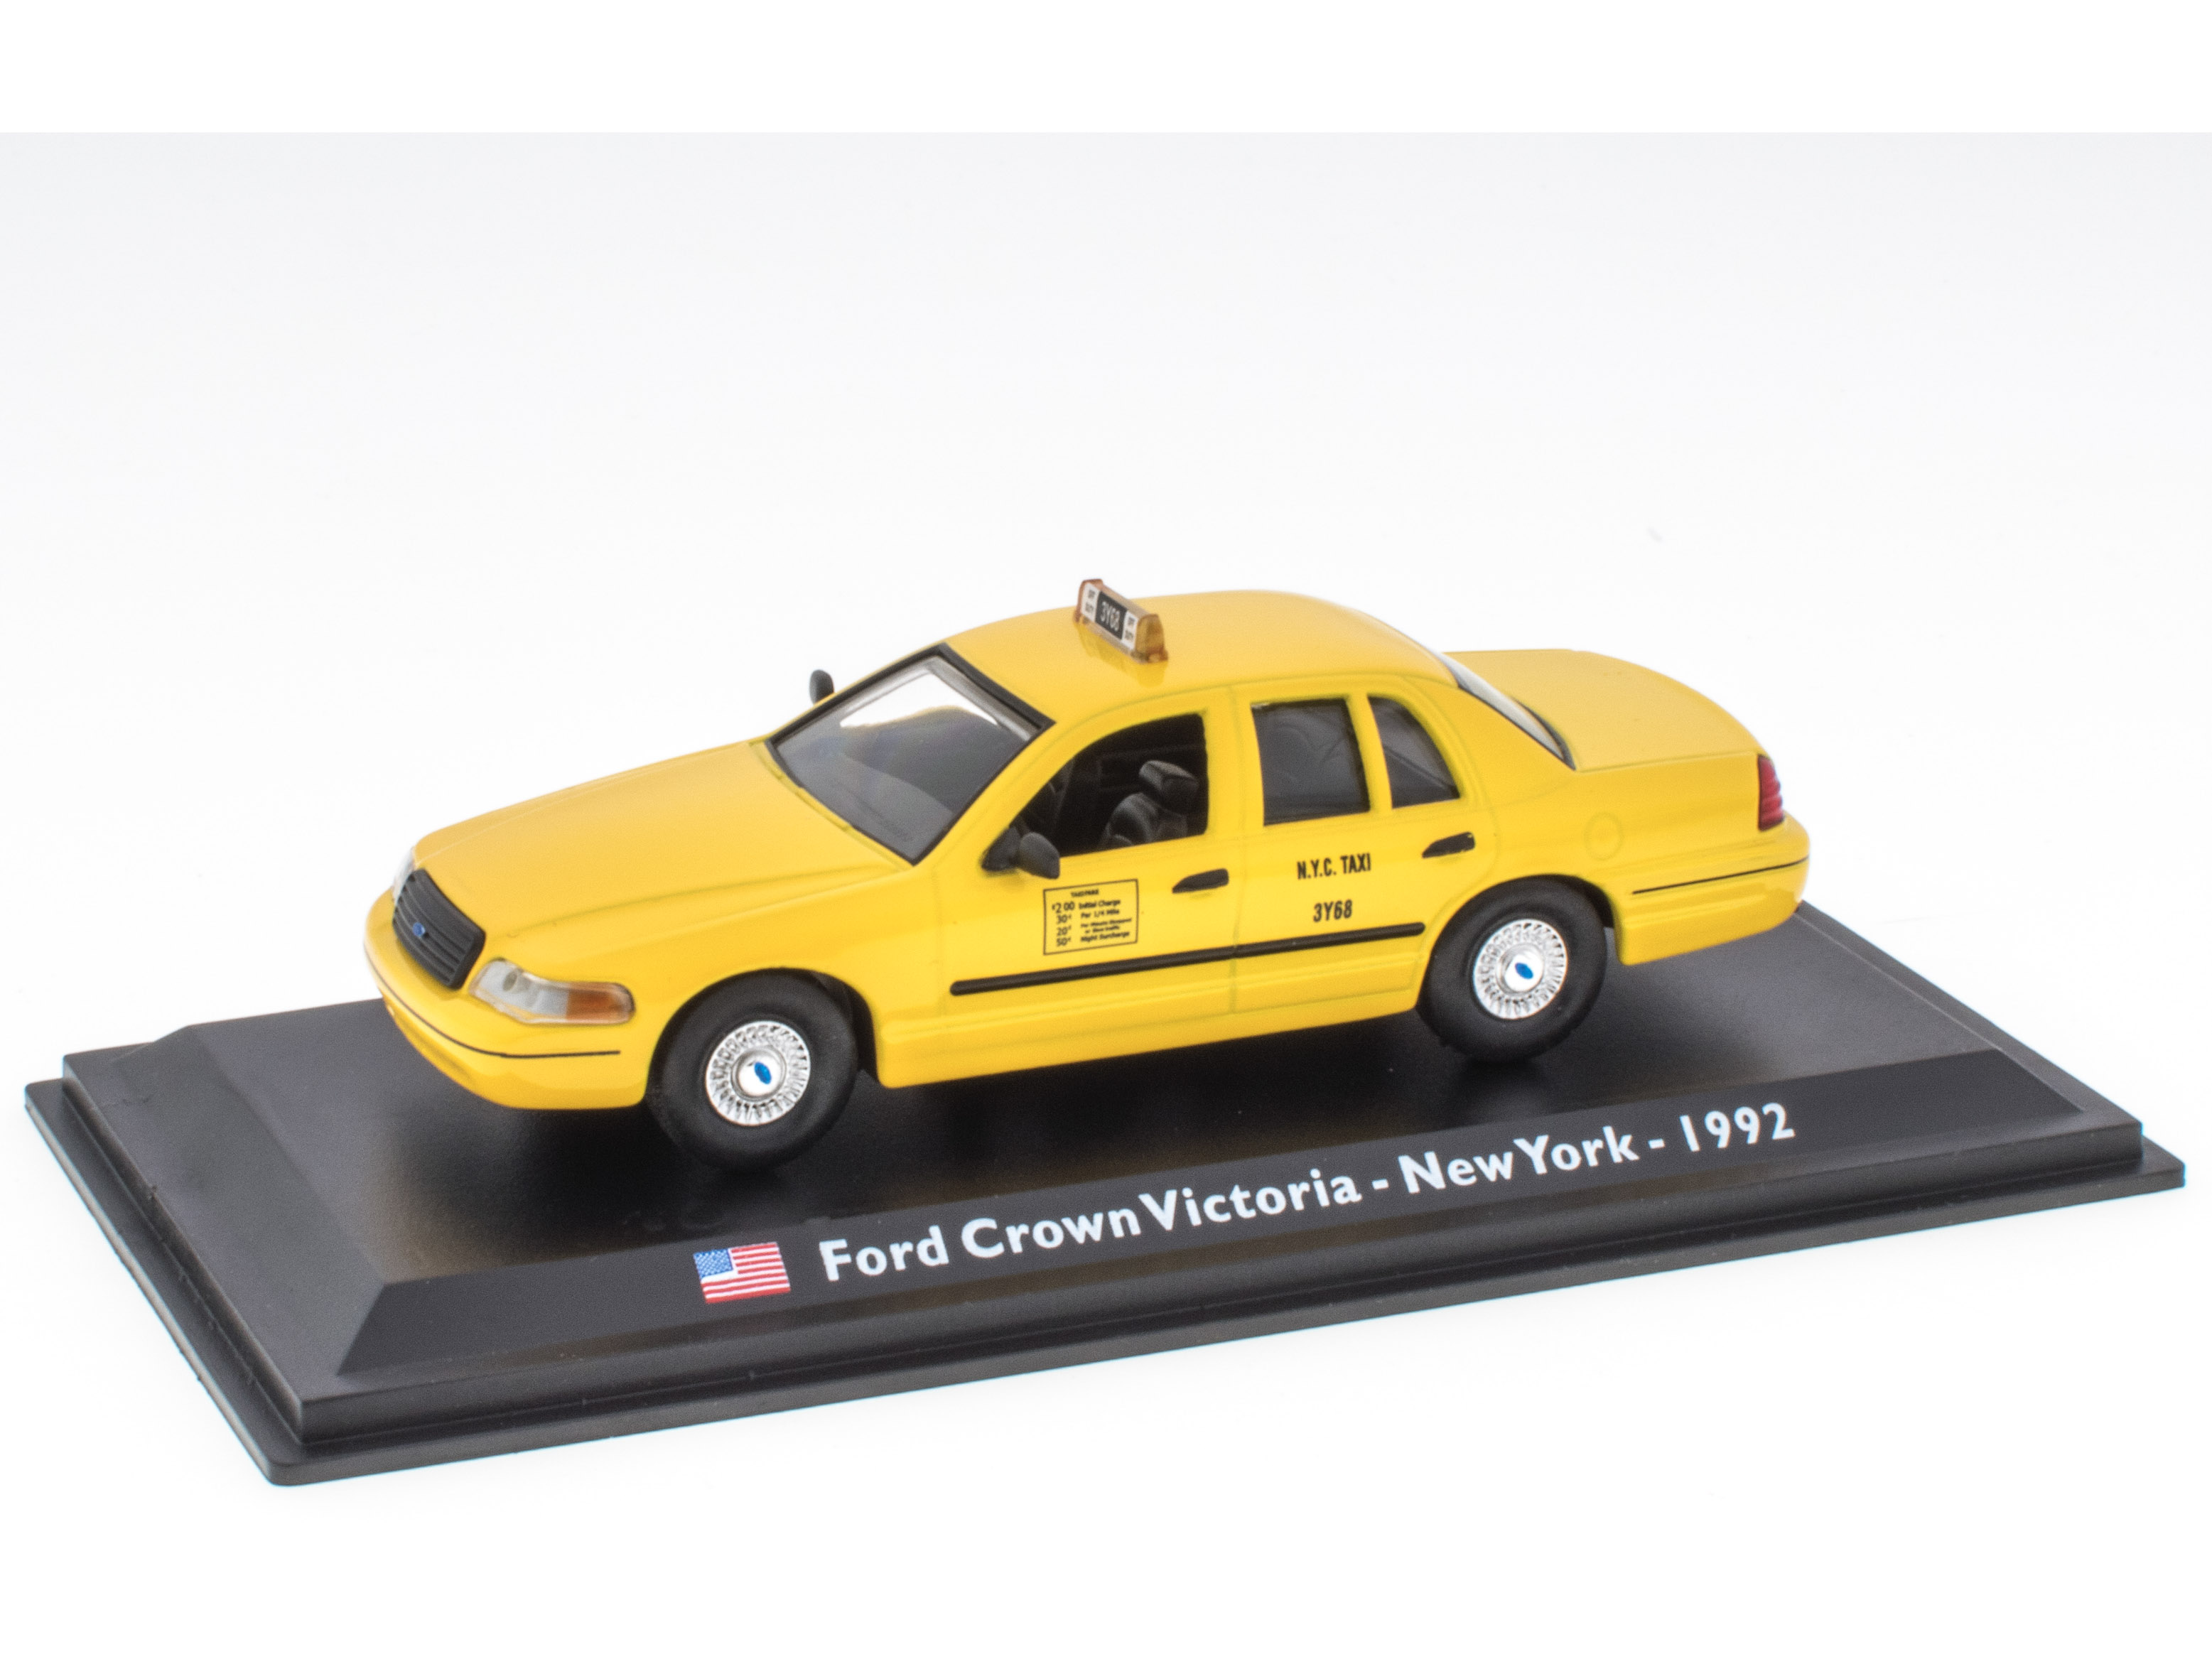 Ford Crown Victoria - New York - 1992